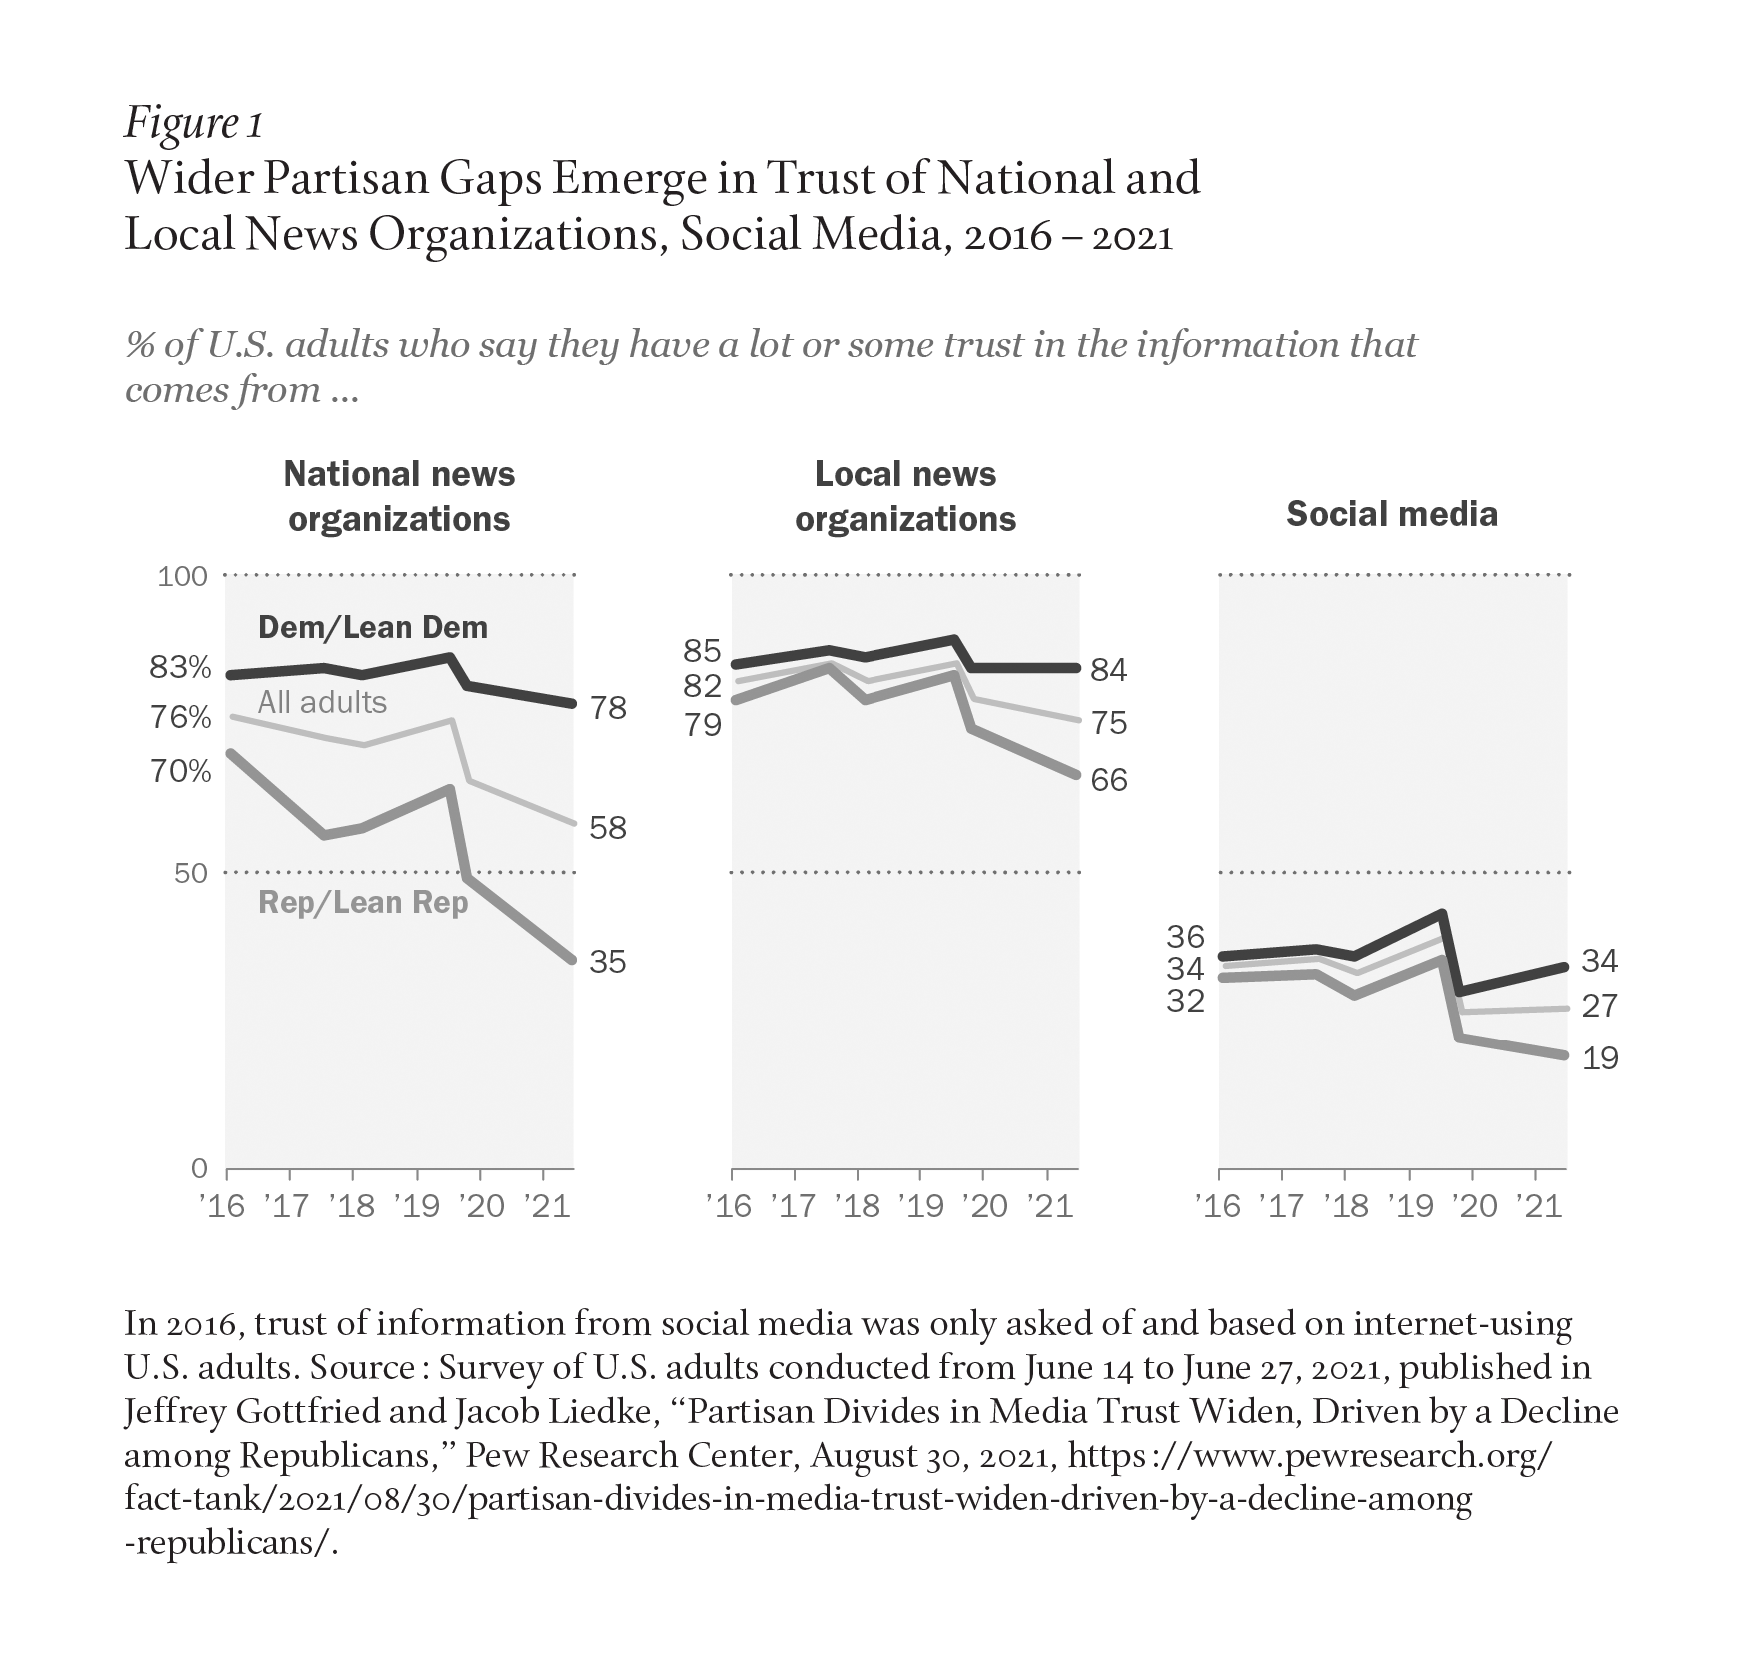 Image description: Three line charts show Democrats' average trust in sources of national news was 78-83%, local news 84-85%, and social media 34-36% in 2016-2021. Republicans' rates fell from 70% to 35% for national news, 79% to 66% for local news, and 32% to 19% for social media between 2016 and 2021. Caption: Source: Jeffrey Gottfried and Jacob Liedke, “Partisan Divides in Media Trust Widen, Driven by a Decline among Republicans,” Pew Research Center, August 30, 2021.